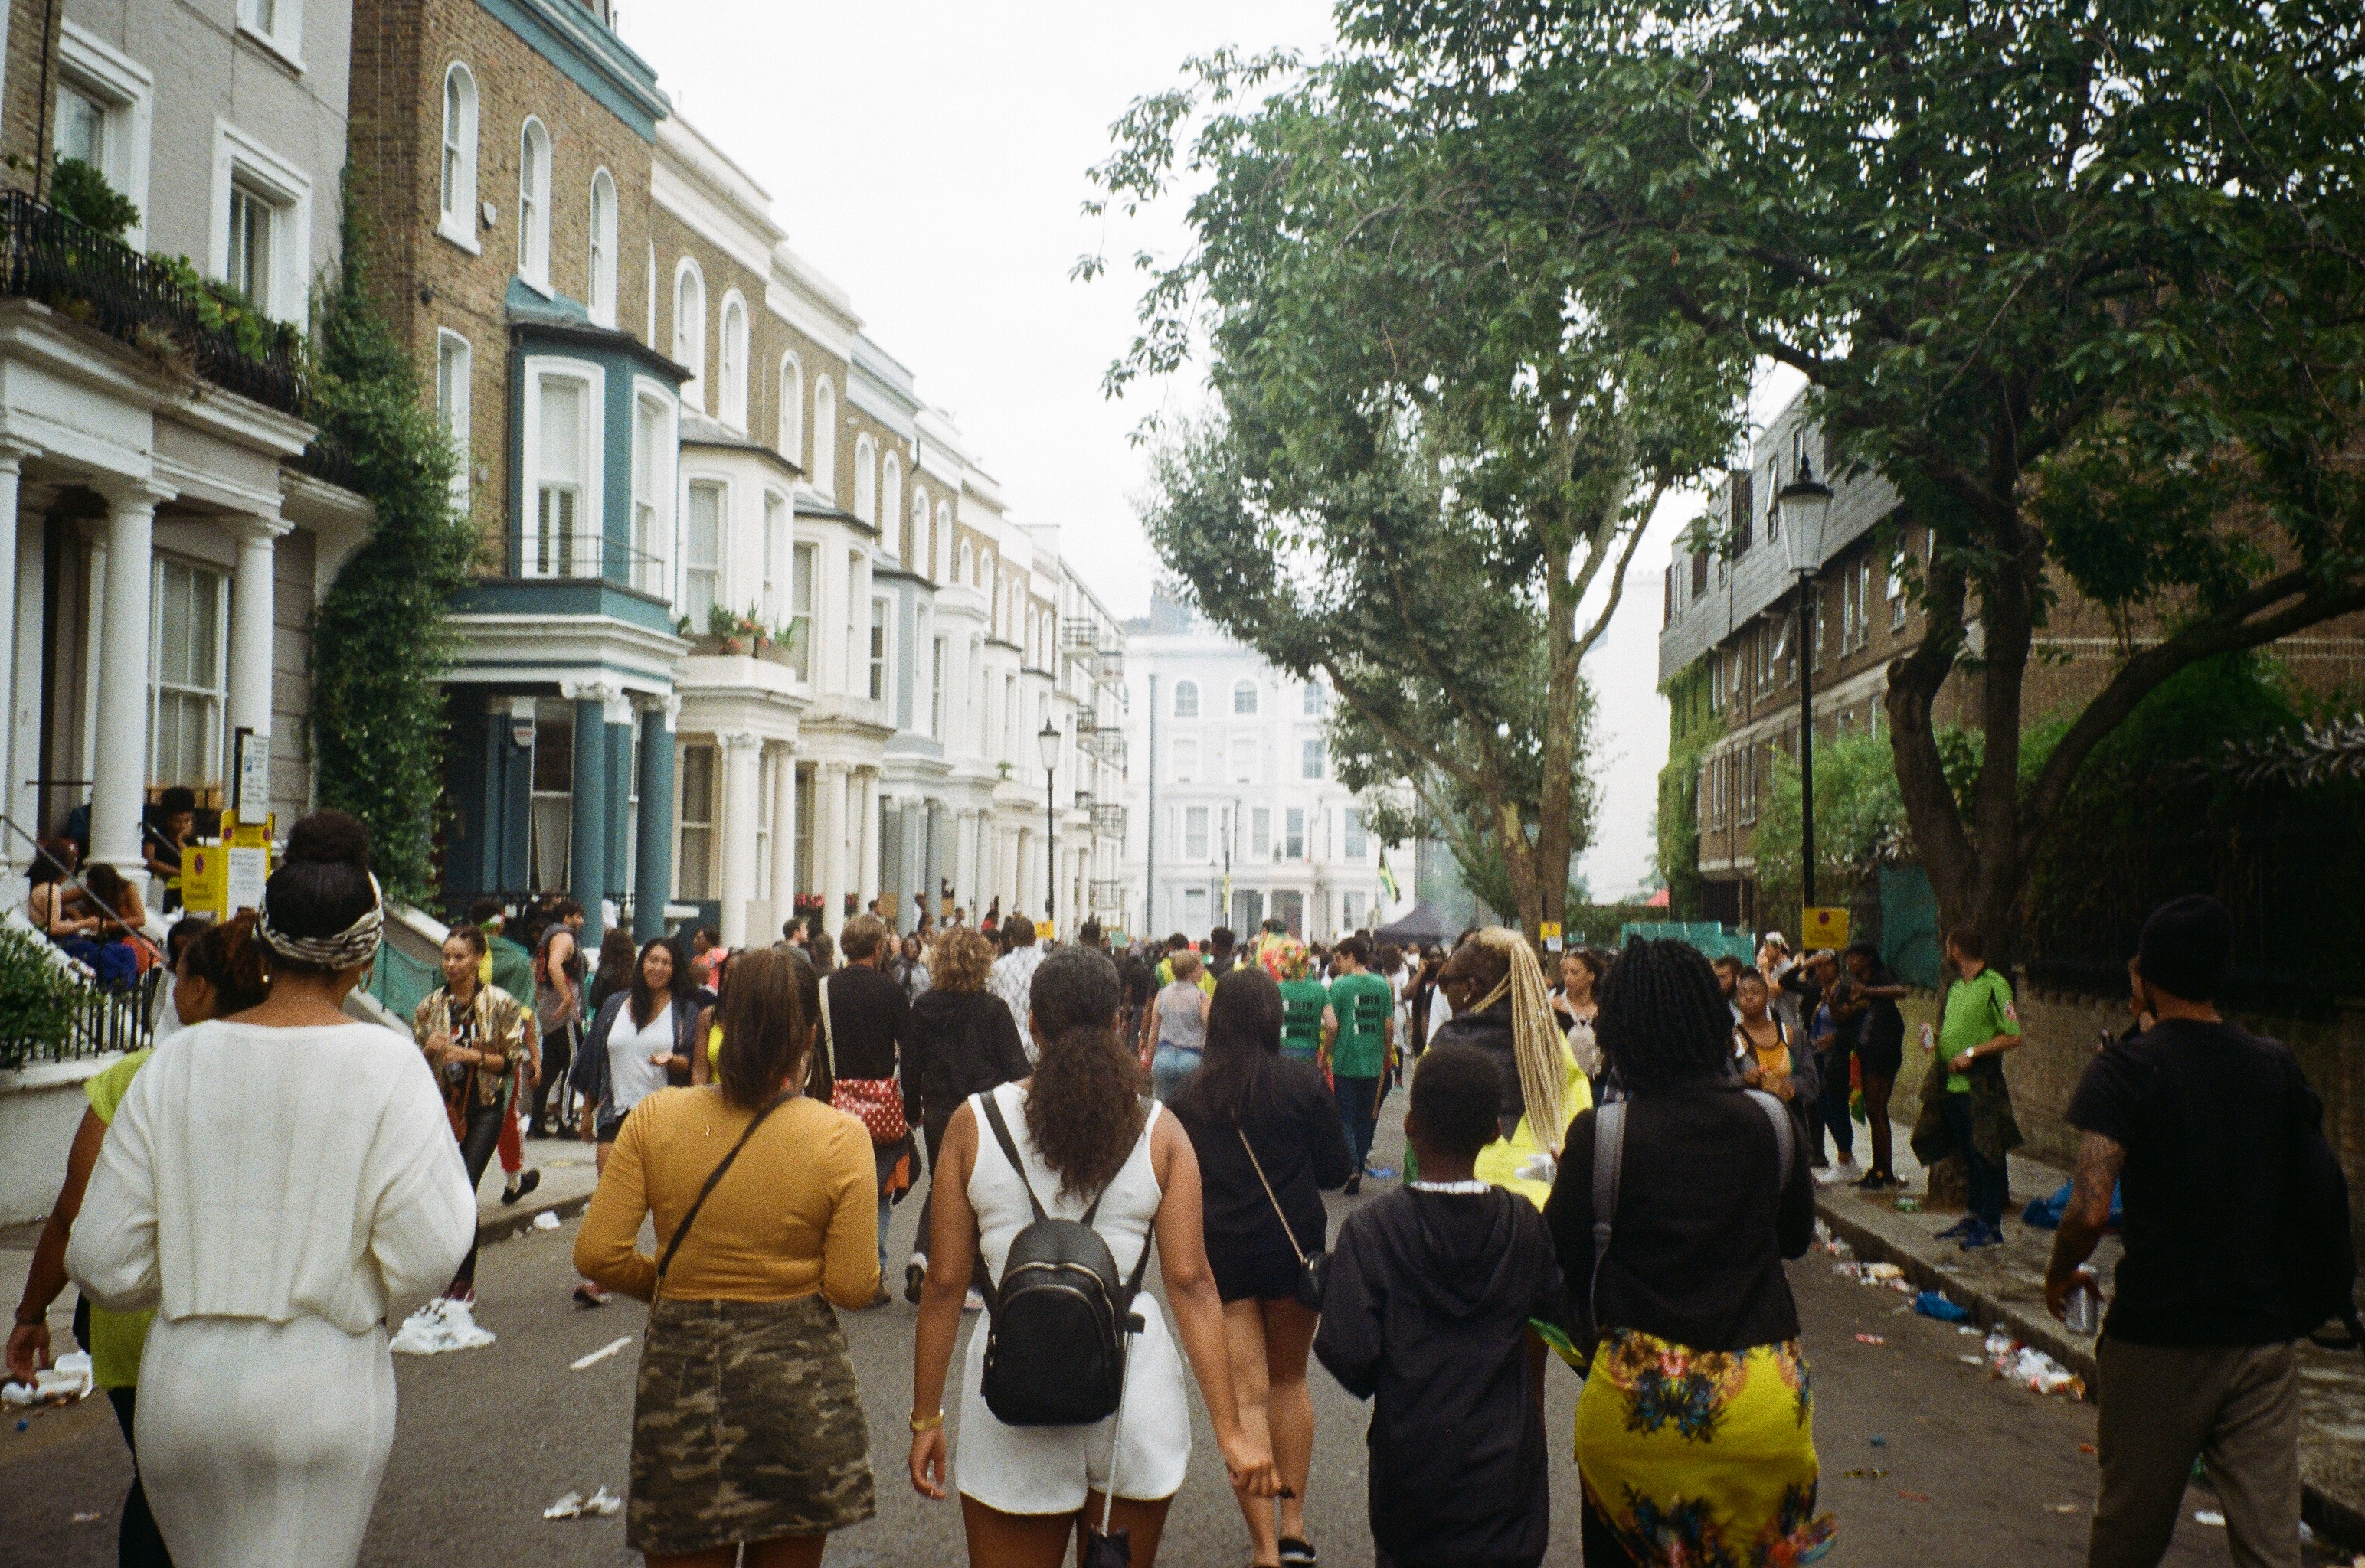 nottinghill carnival crowds